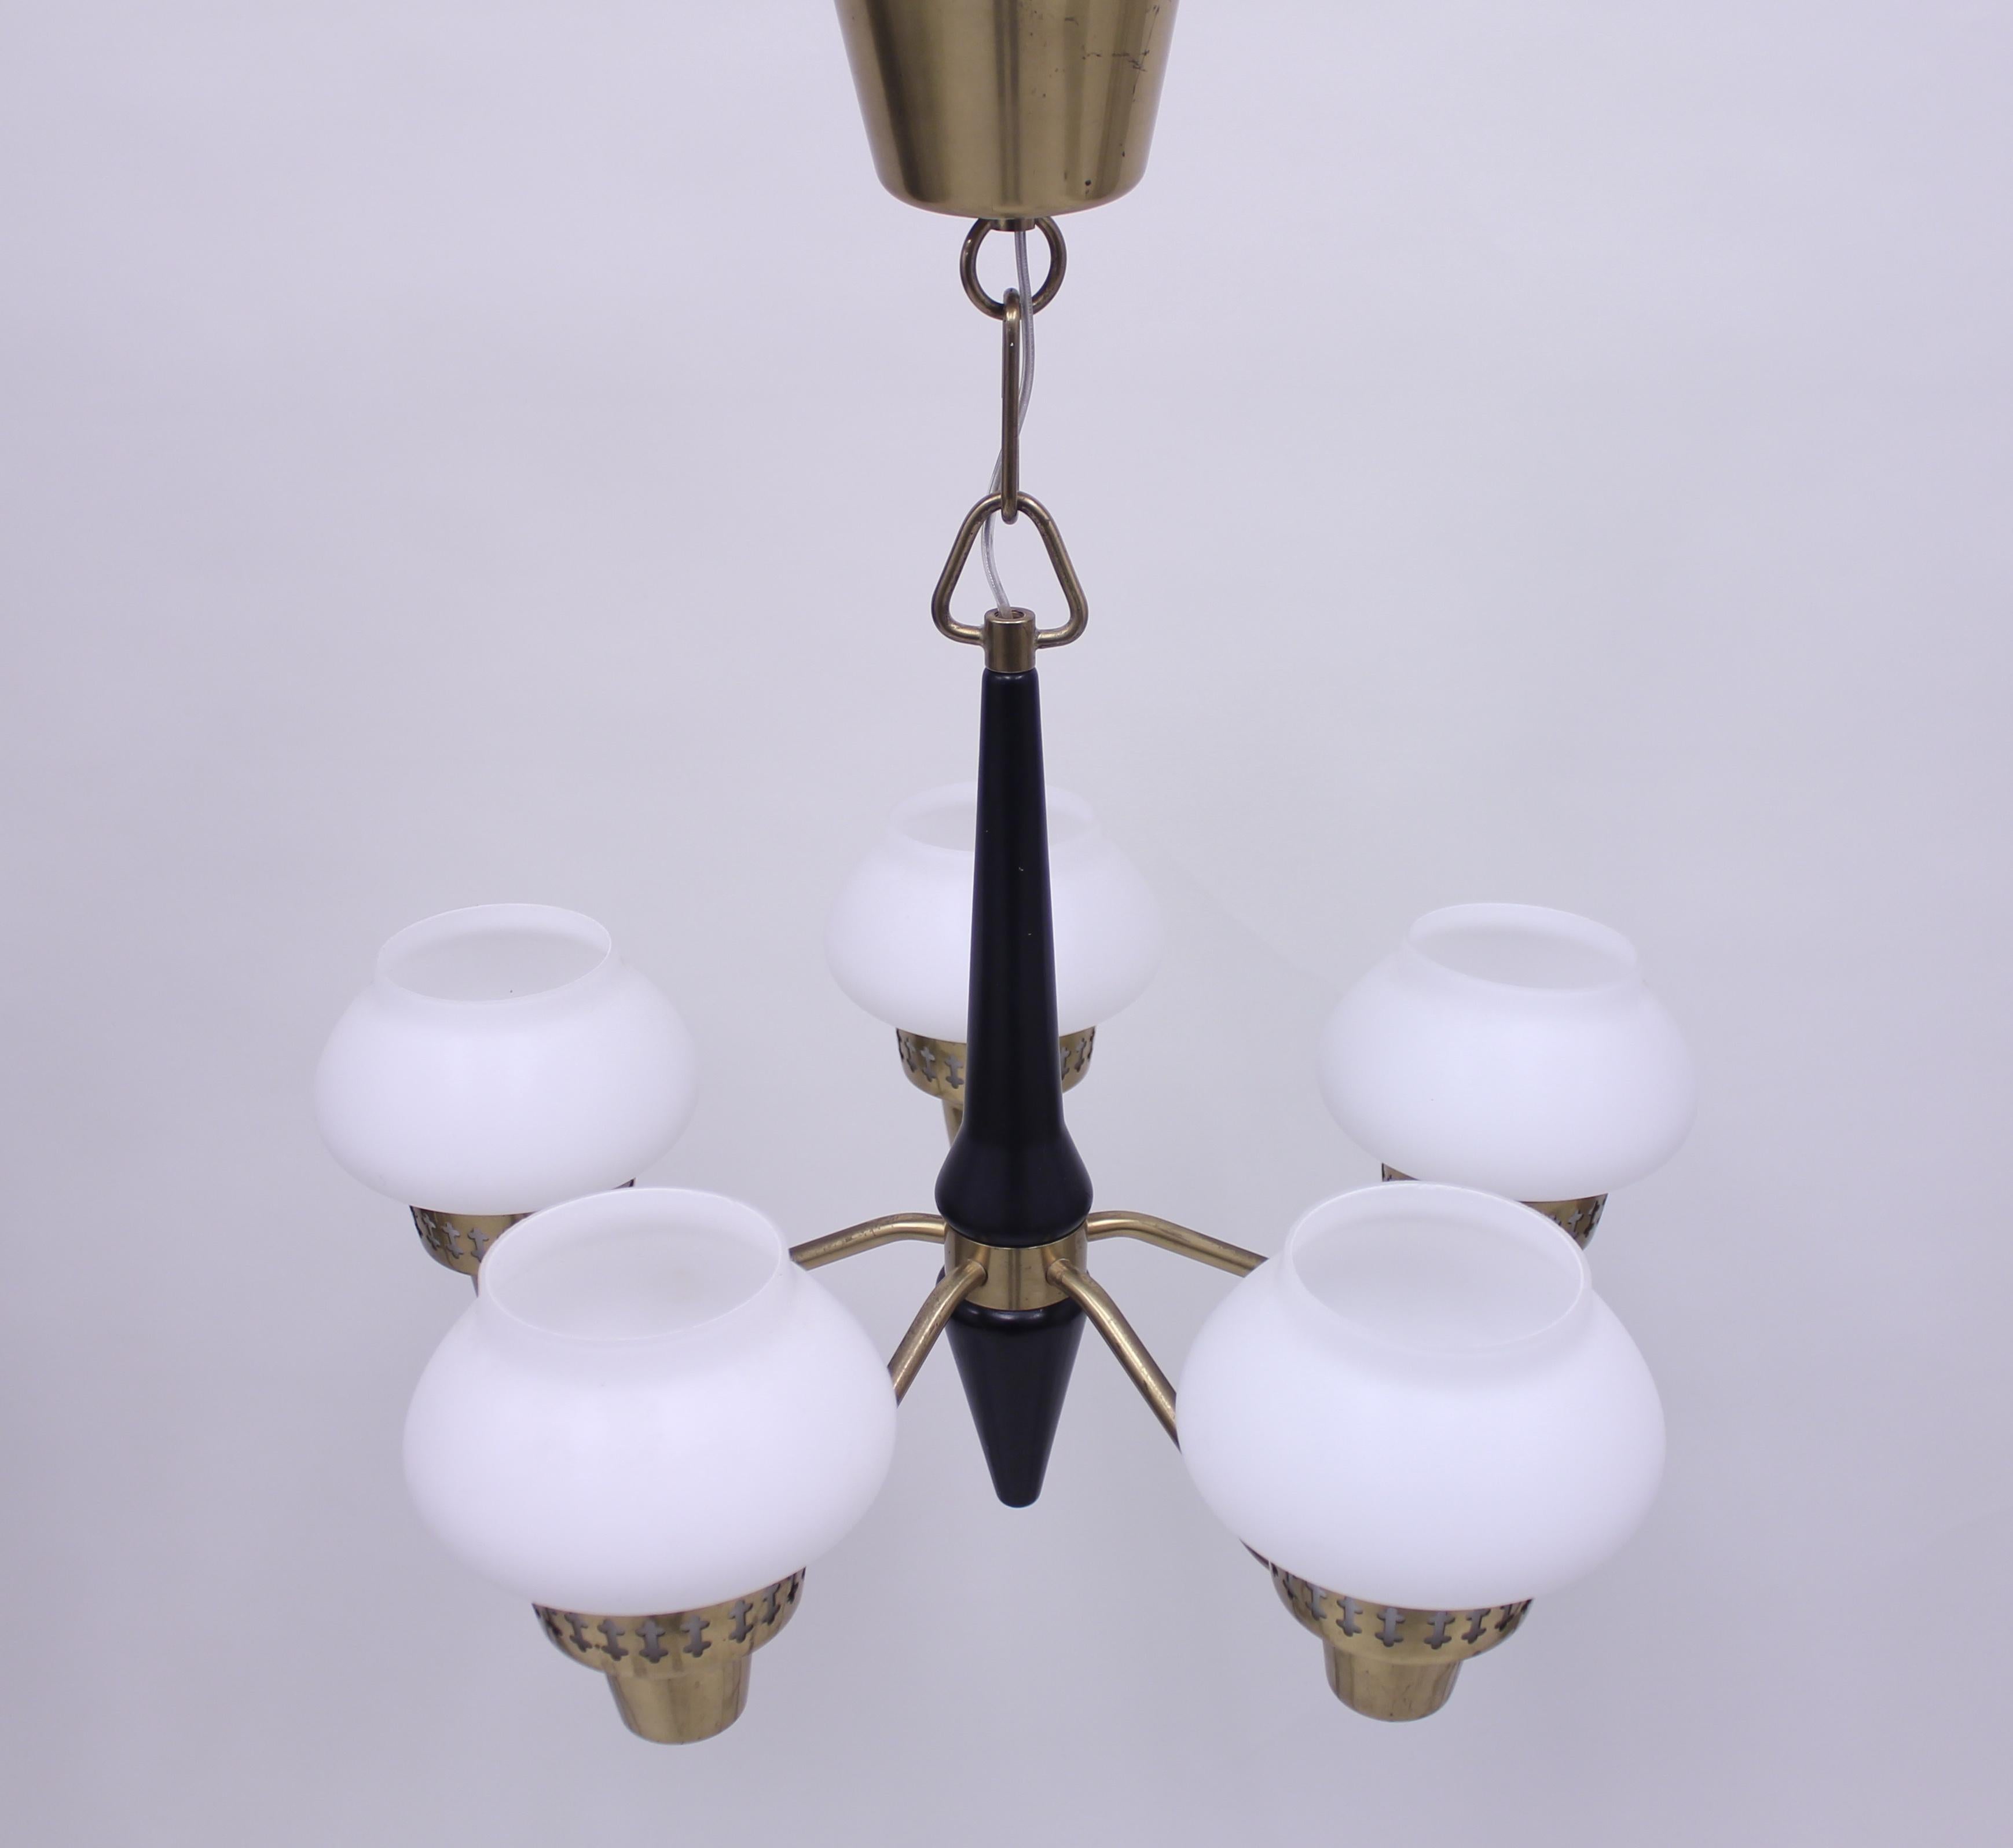 Five-light ceiling lamp manufactured by ASEA in the 1950s. Attributed to Hans Bergström who has designed many models for the brand. Lathed stem of black painted wood, brass fittings with opaline glass shades. New wiring and new plug. Very good